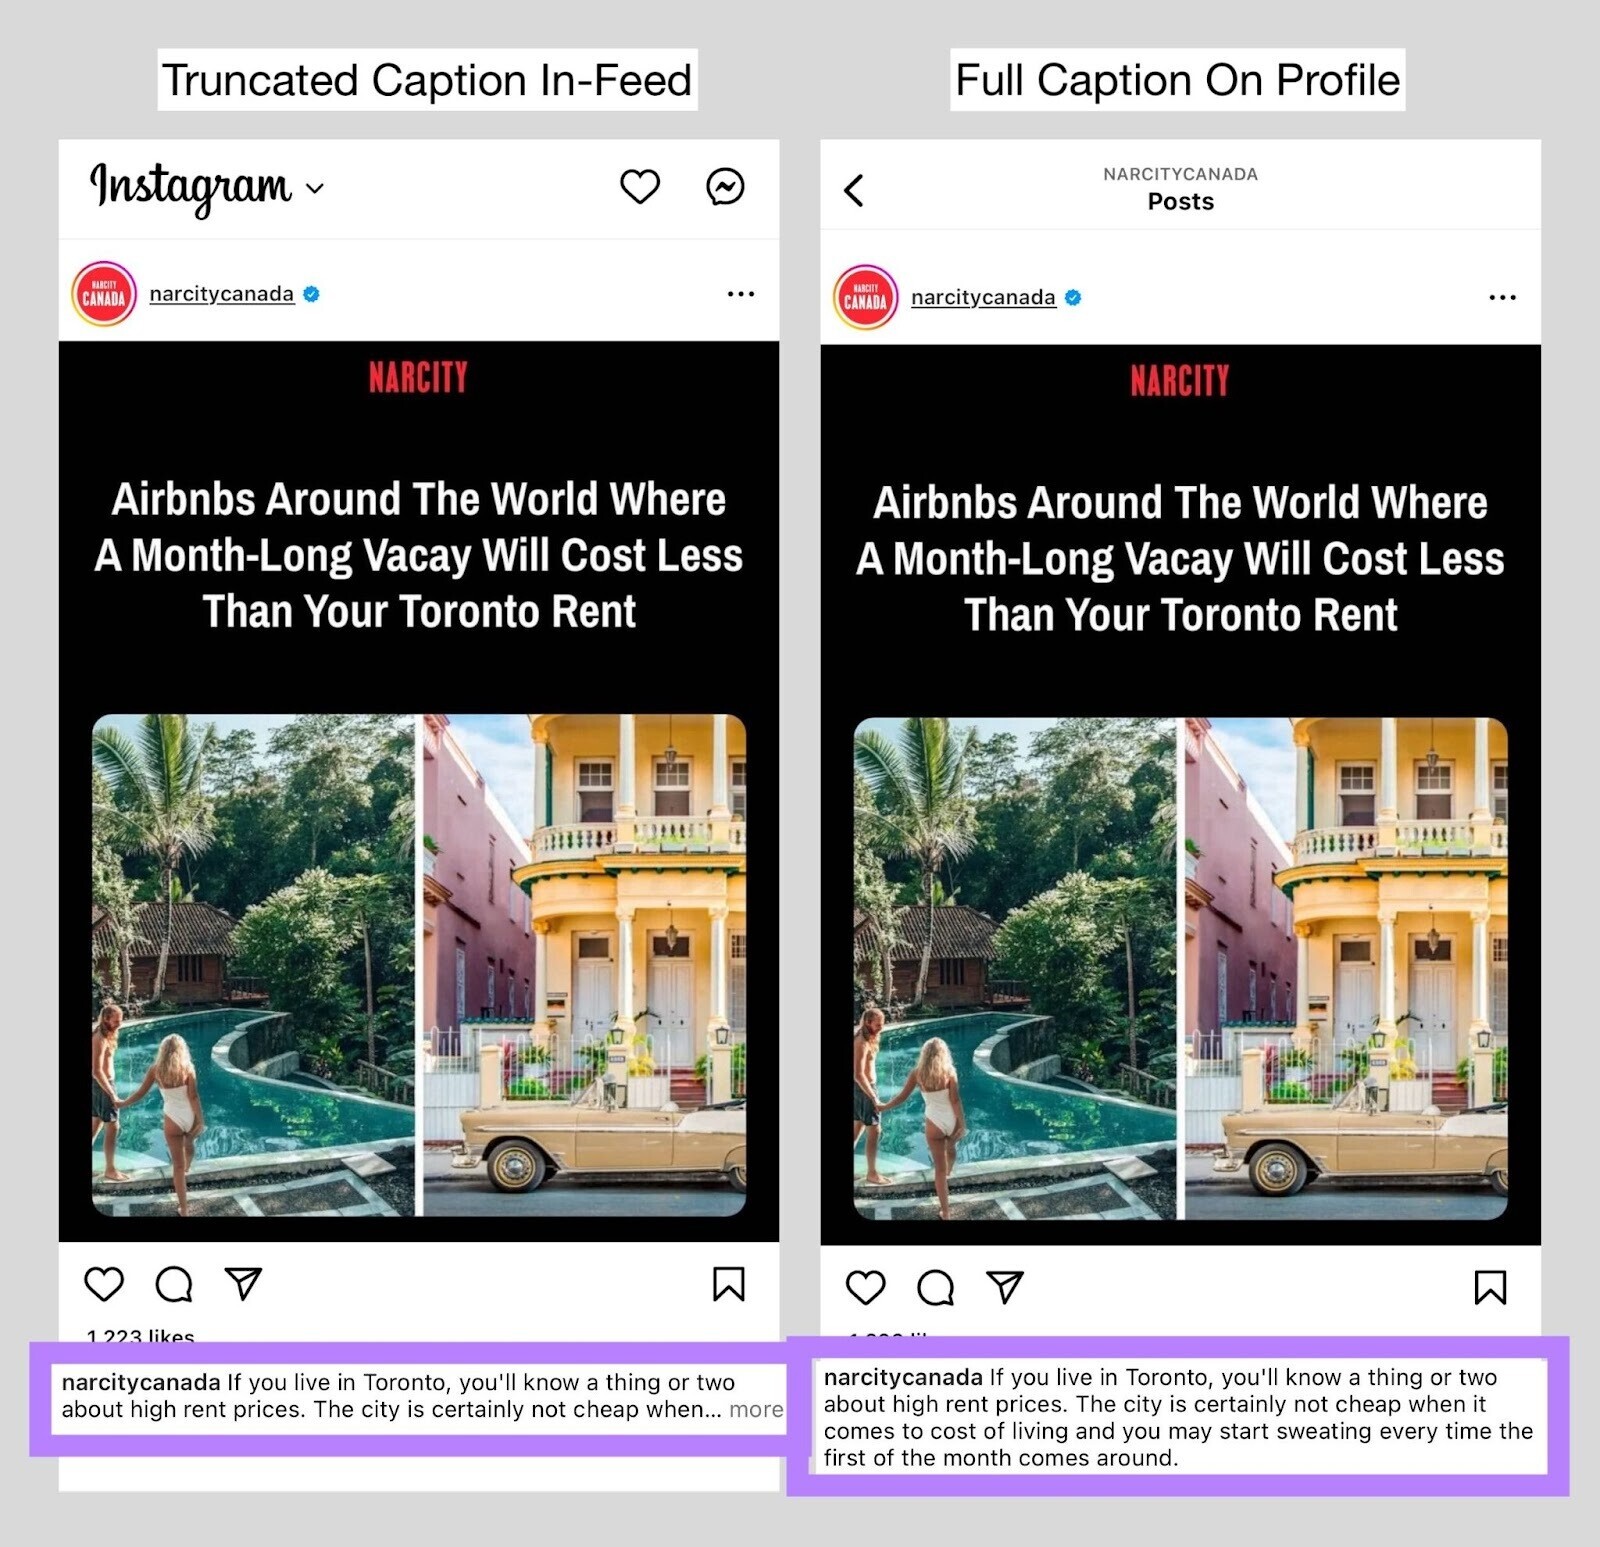 an example of Instagram post with "truncated caption in-feed" and "full caption on profile"